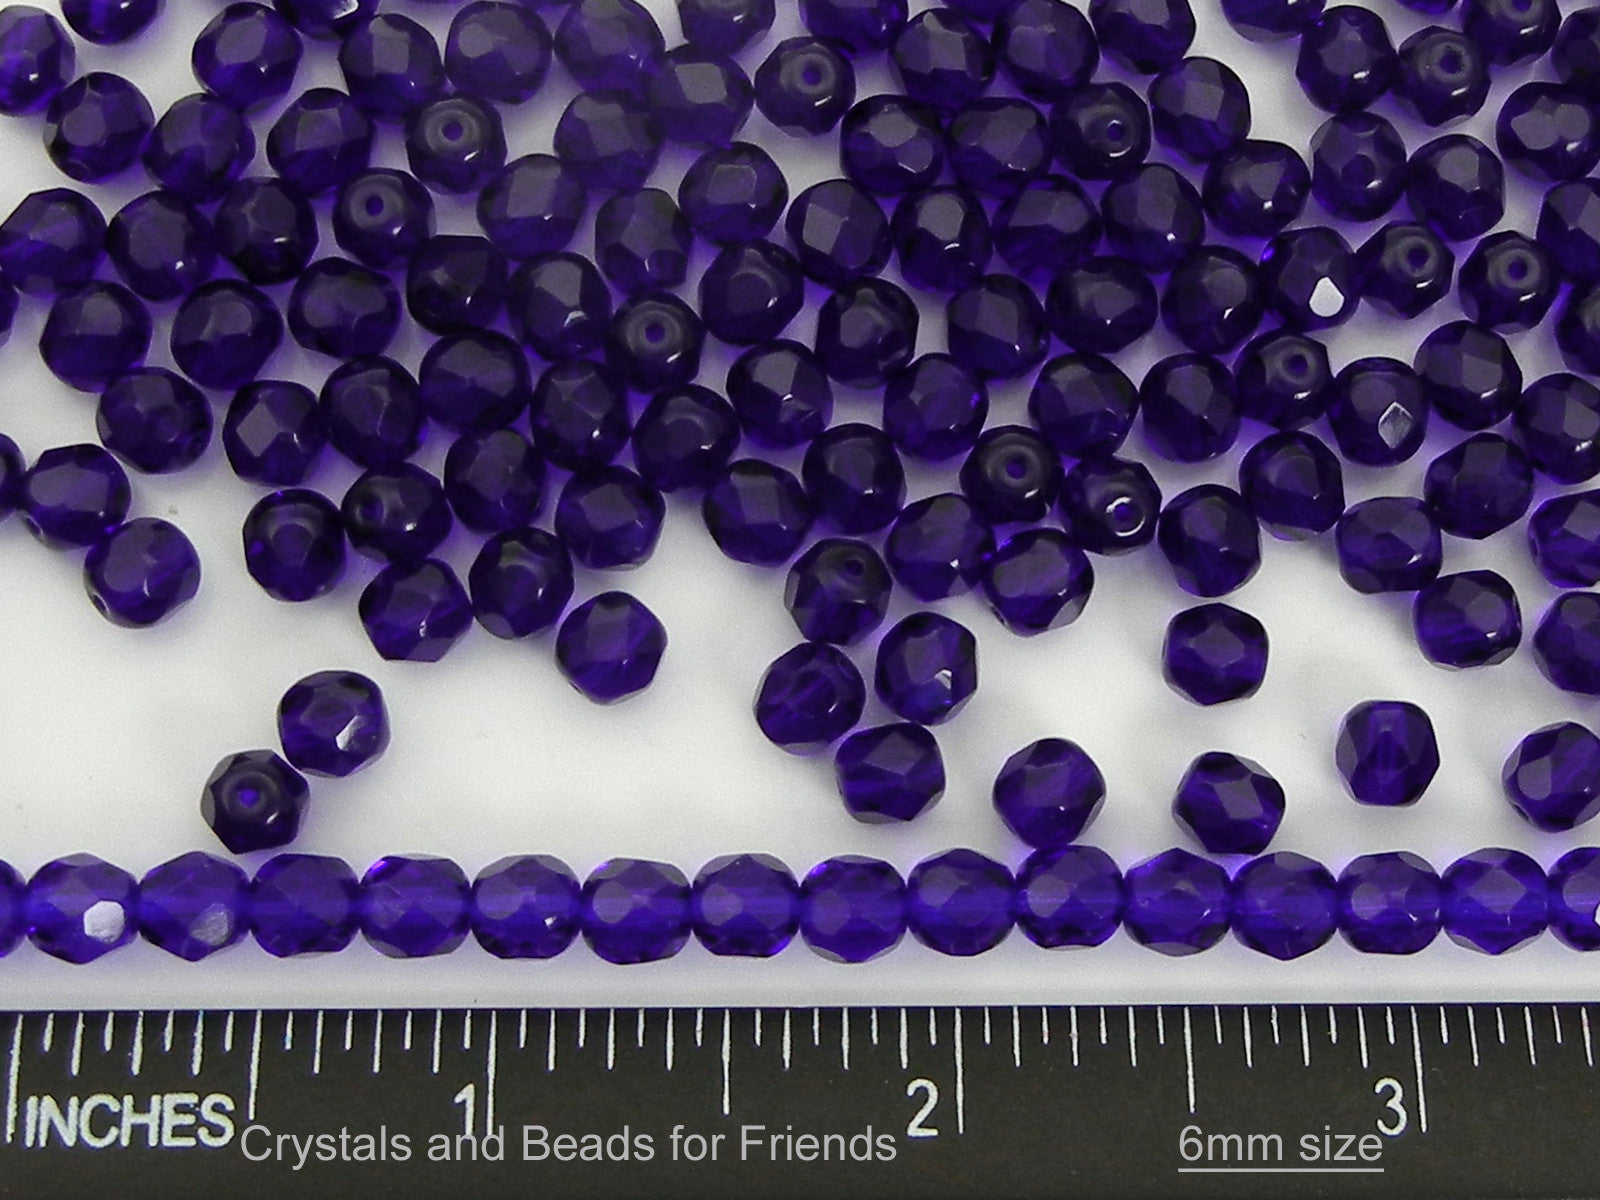 Cobalt Blue, loose Czech Fire Polished Round Faceted Glass Beads, rich navy blue, 3mm, 4mm, 6mm, 8mm